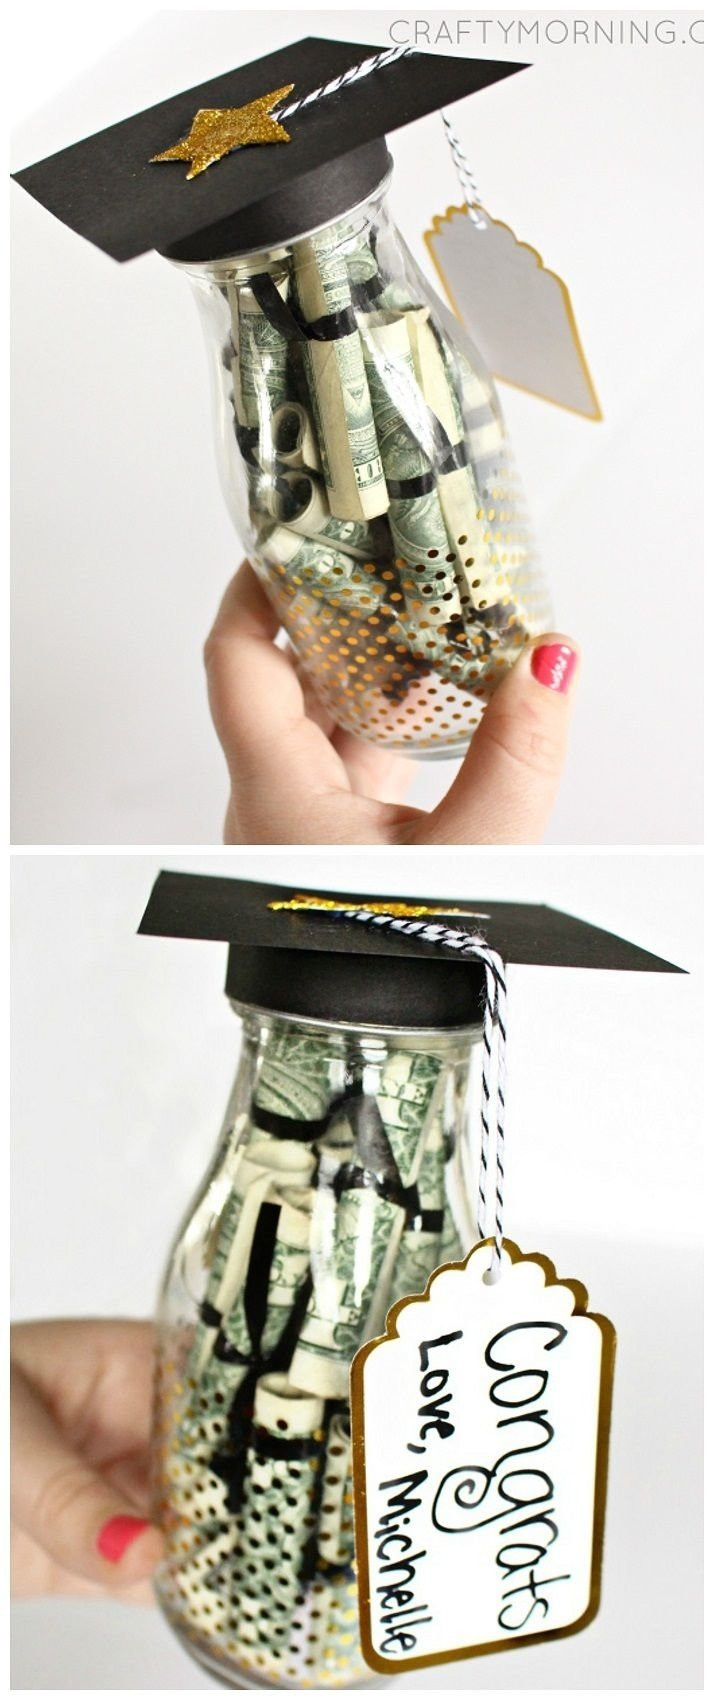 The 25 Best Ideas for Graduation Gift Ideas for son Home, Family